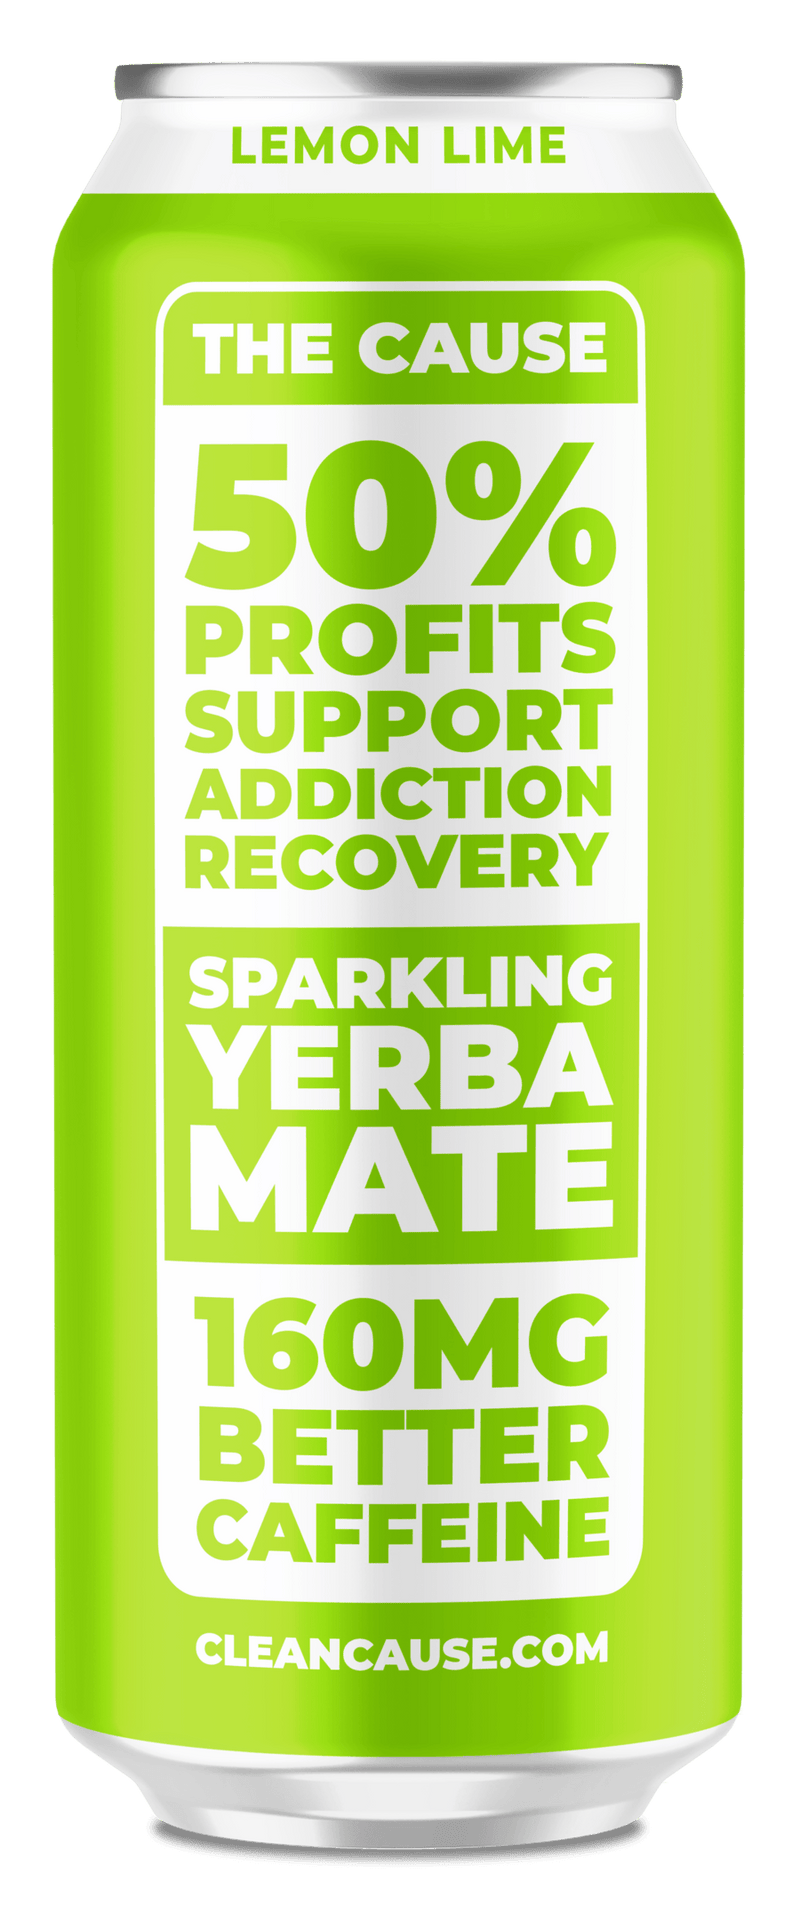 Clean Cause Yerba Mate Lemon Lime - Shelburne Country Store